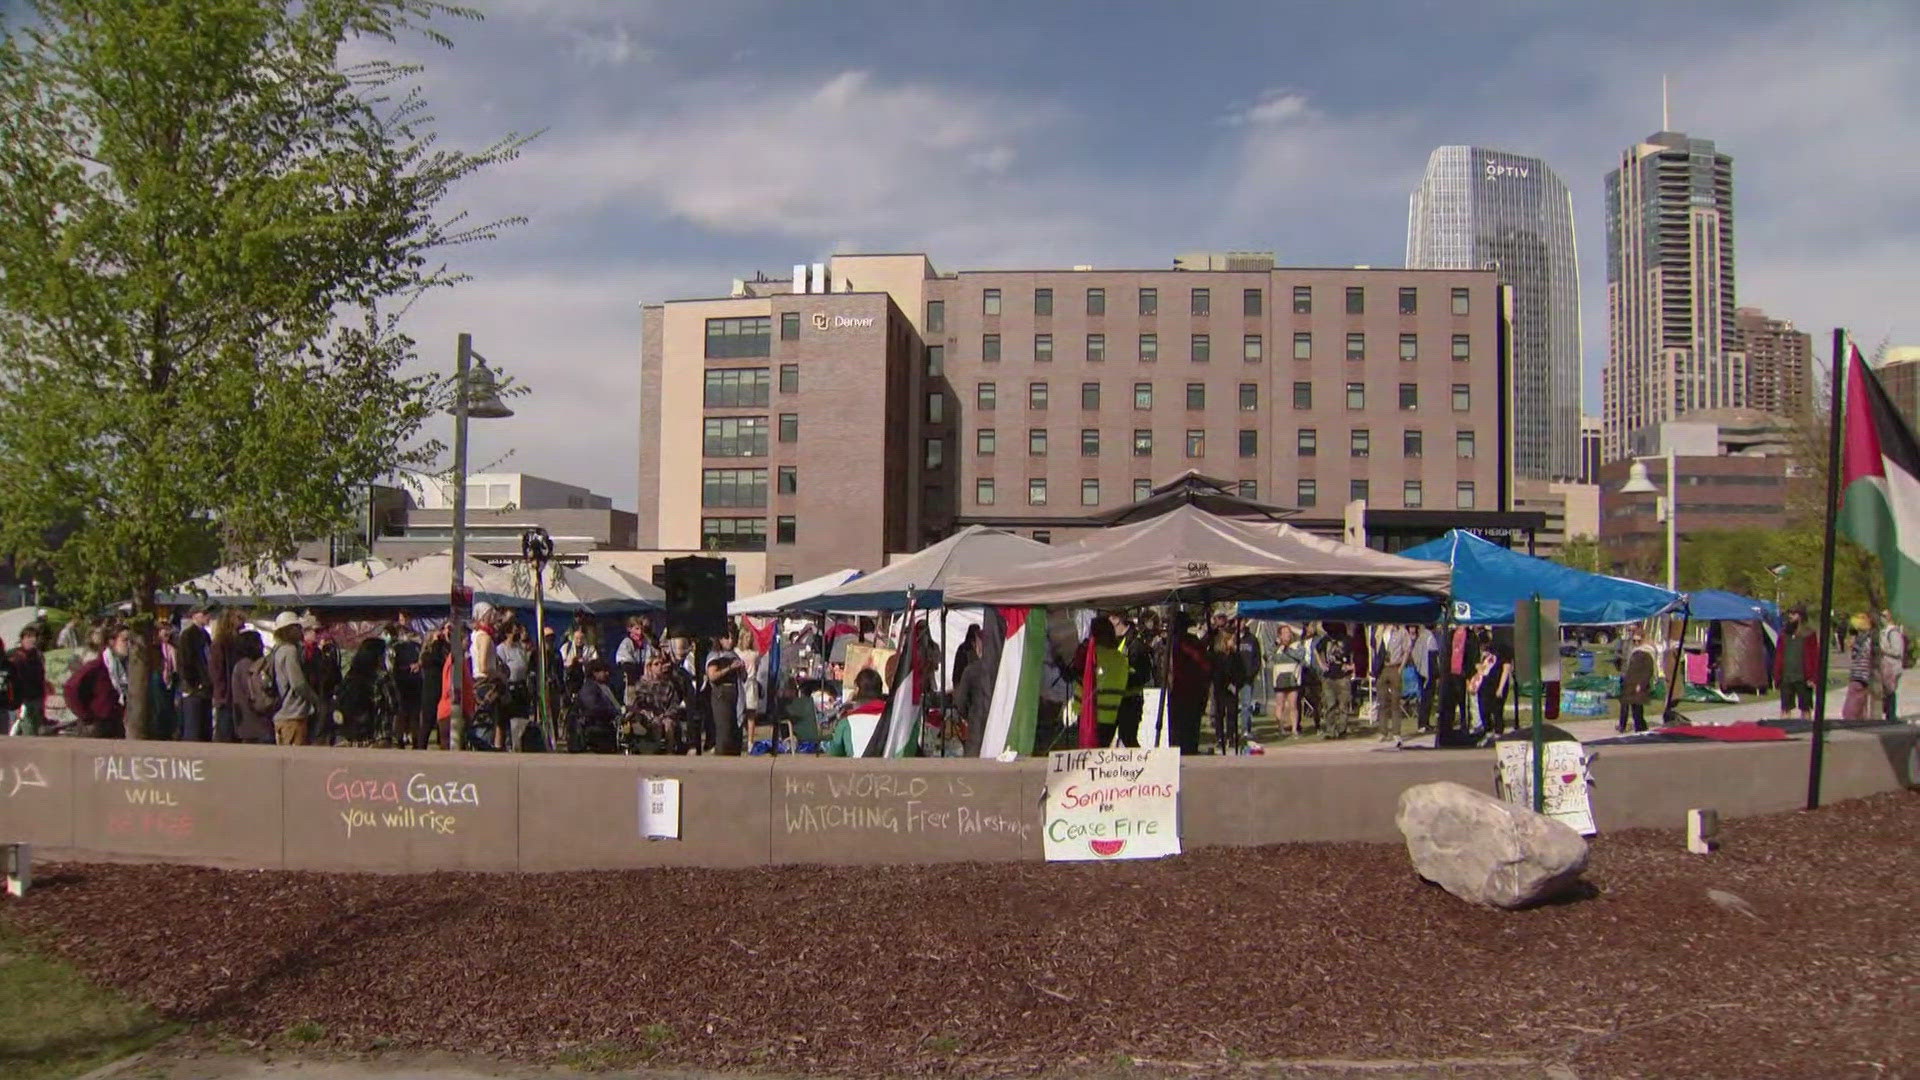 The Auraria Campus said donors would donate $15,000 to the International Committee of the Red Cross if the pro-Palestinian protest encampment was removed by 5 p.m.